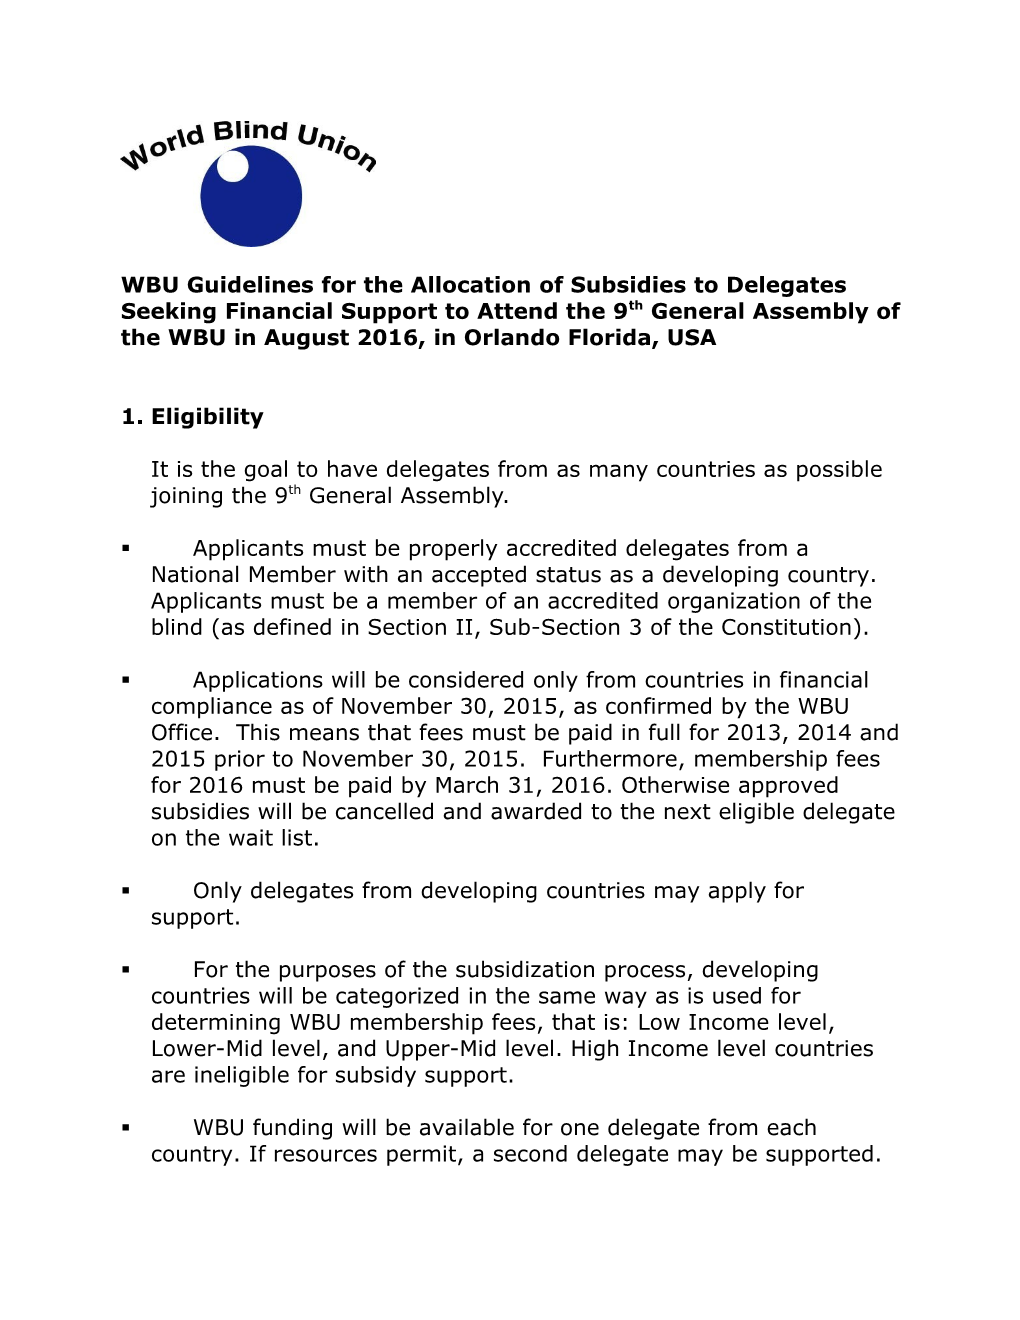 WBU Guidelines for the Allocation of Subsidies to Delegates Seeking Financial Support